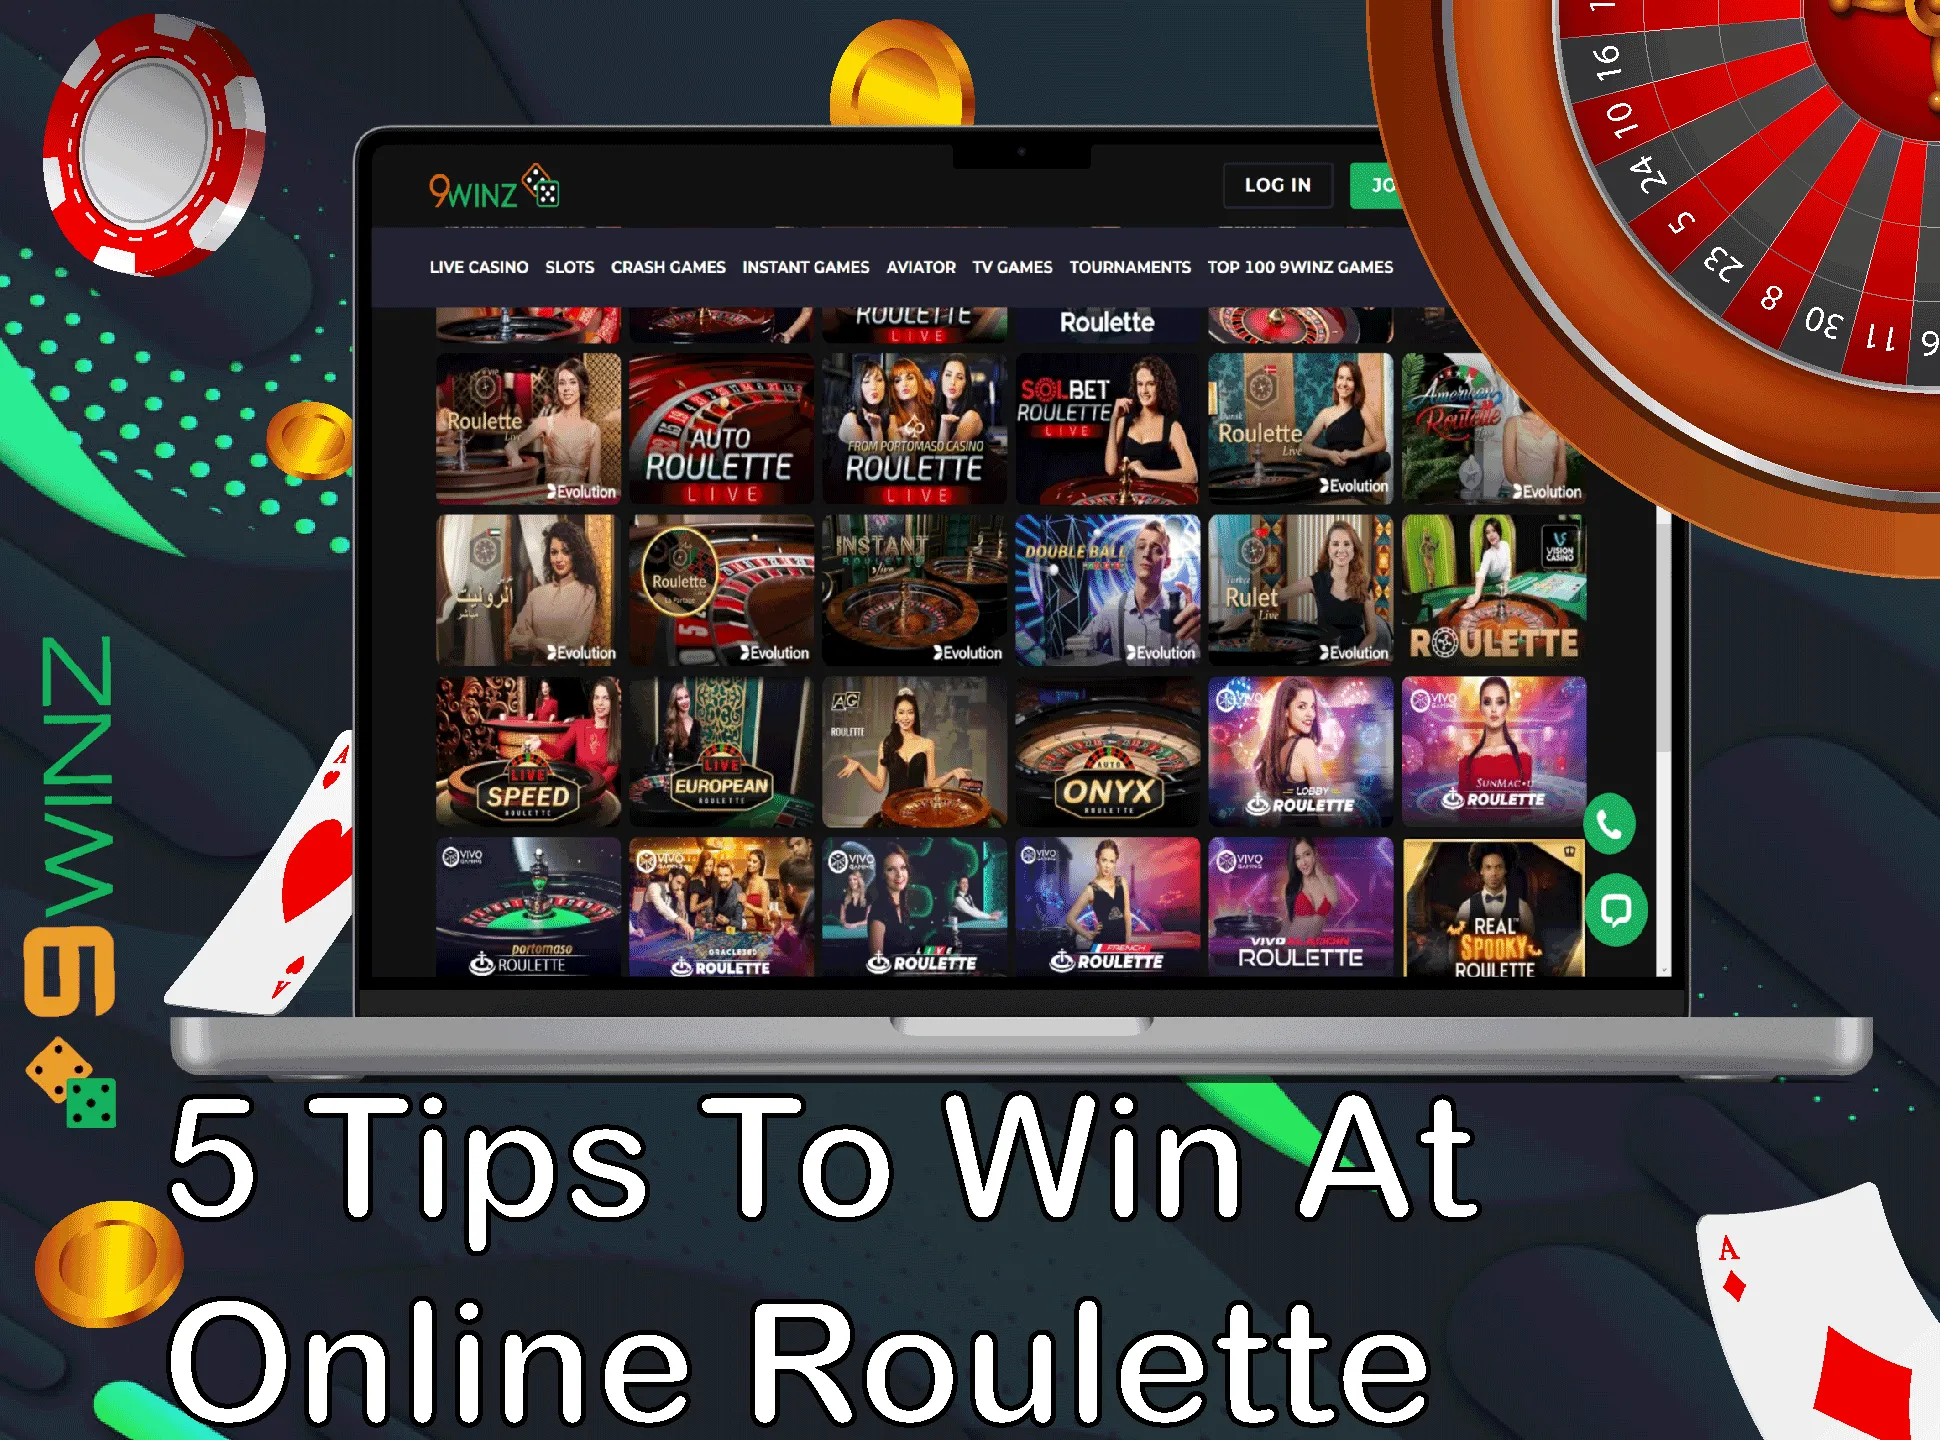 Win everytime playing roulette with the 9winz tips.